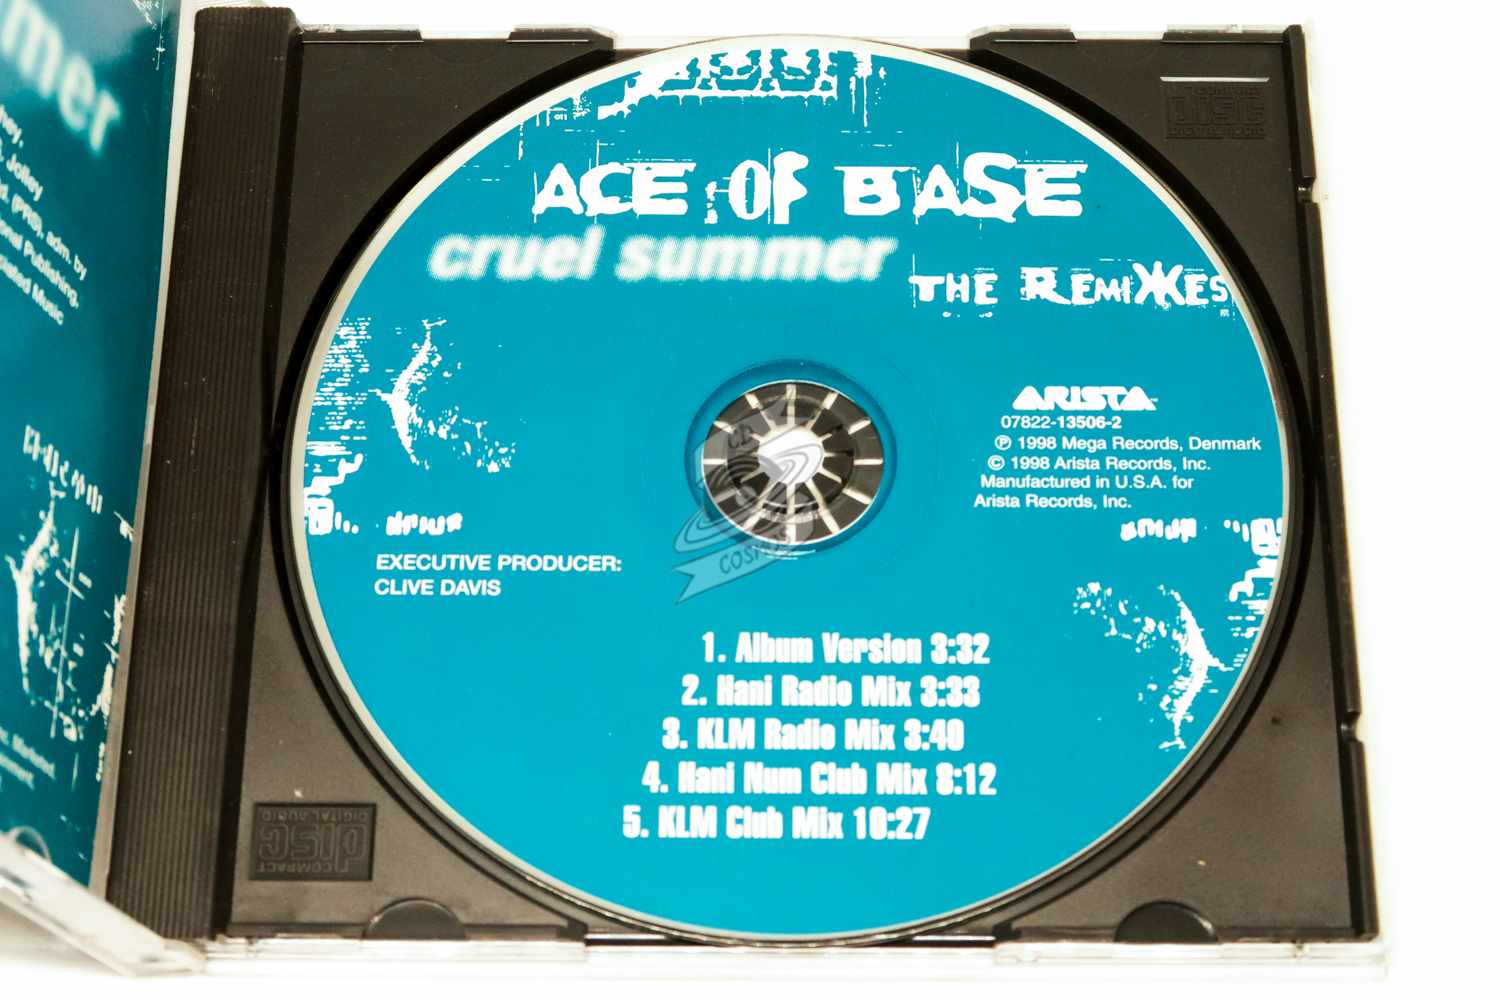 Ace of Base Songs, Albums, Reviews, Bio & More